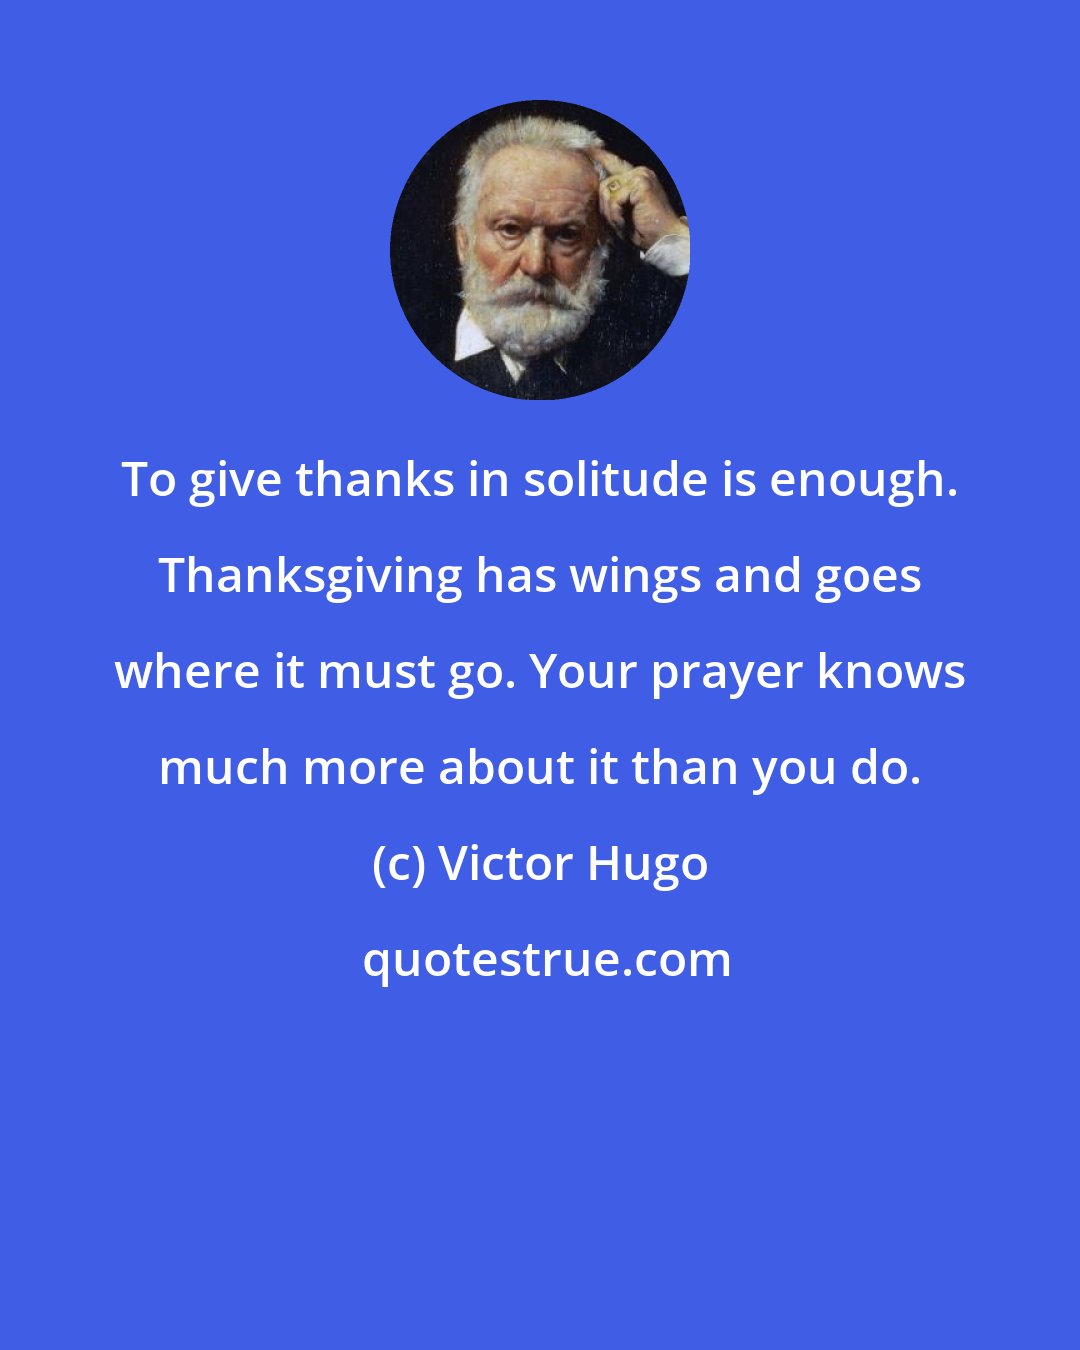 Victor Hugo: To give thanks in solitude is enough. Thanksgiving has wings and goes where it must go. Your prayer knows much more about it than you do.